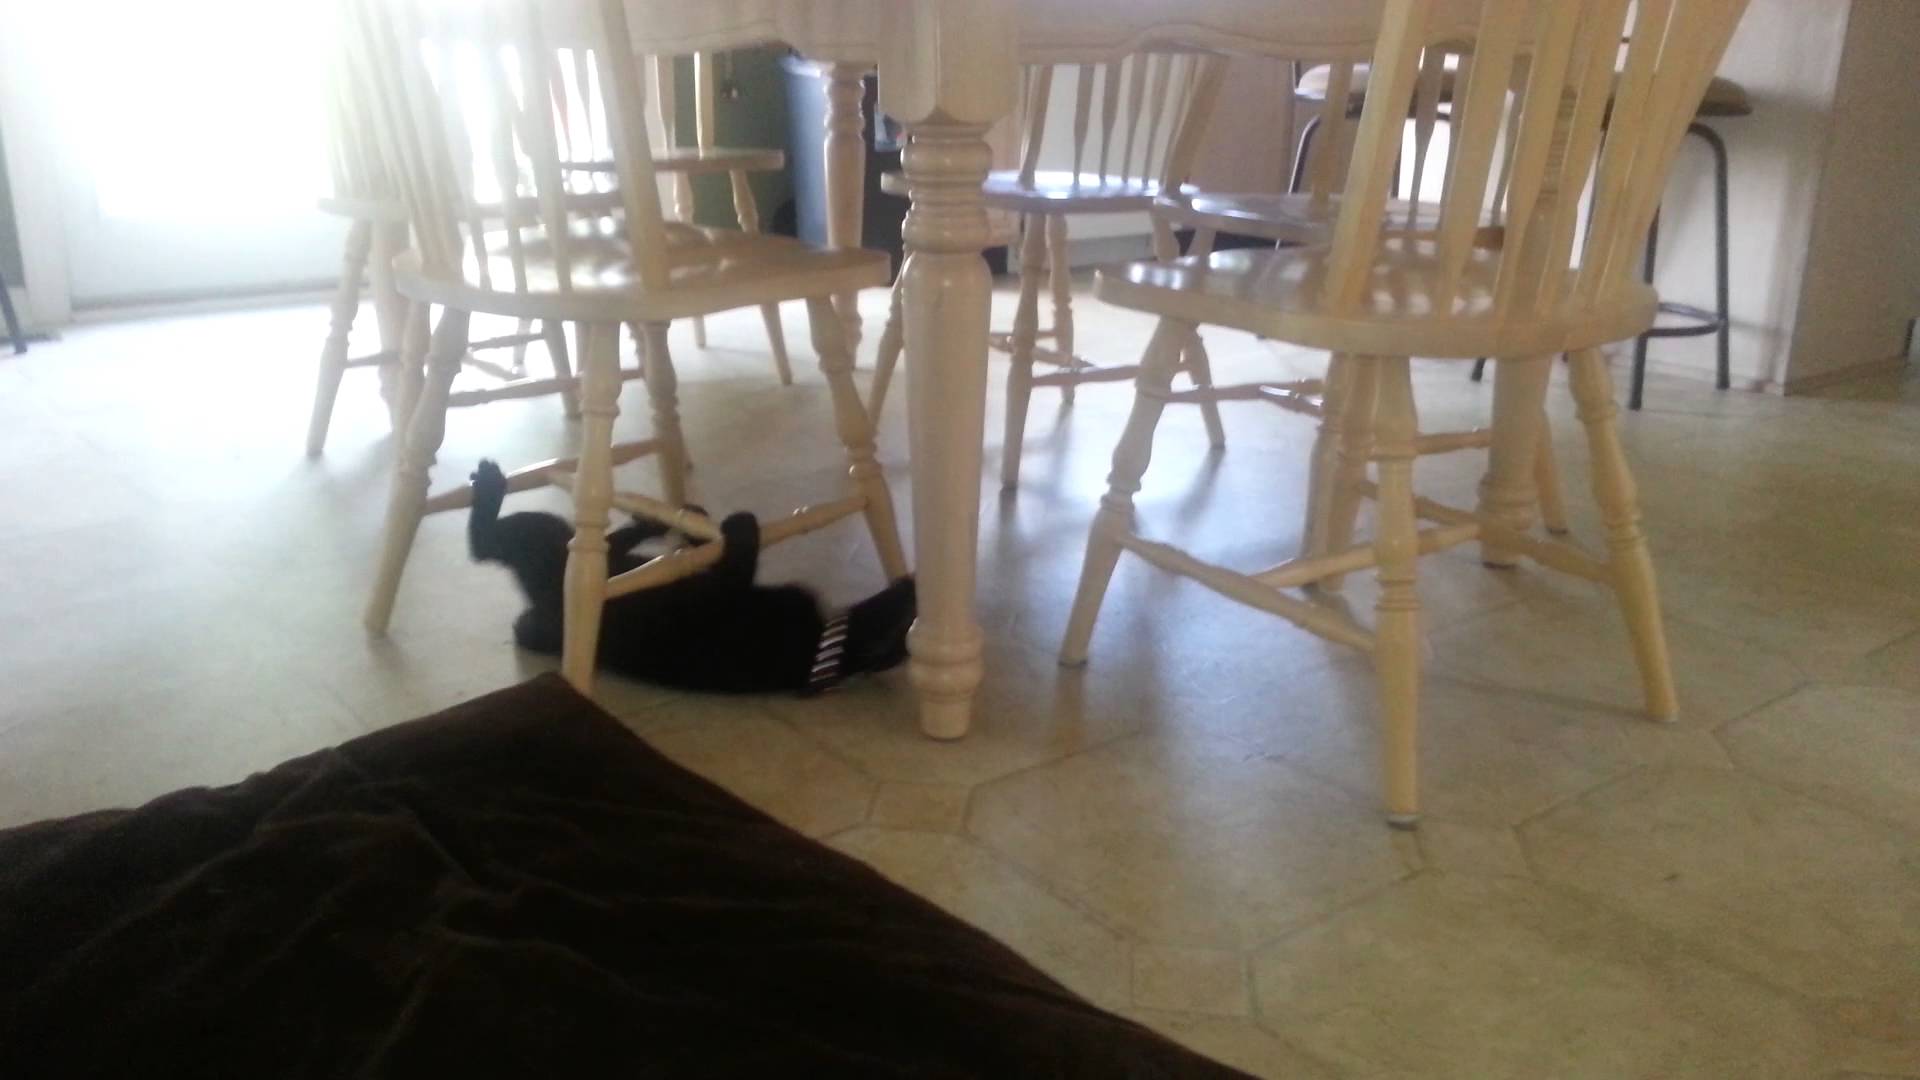 Cat drags itself around underneath table